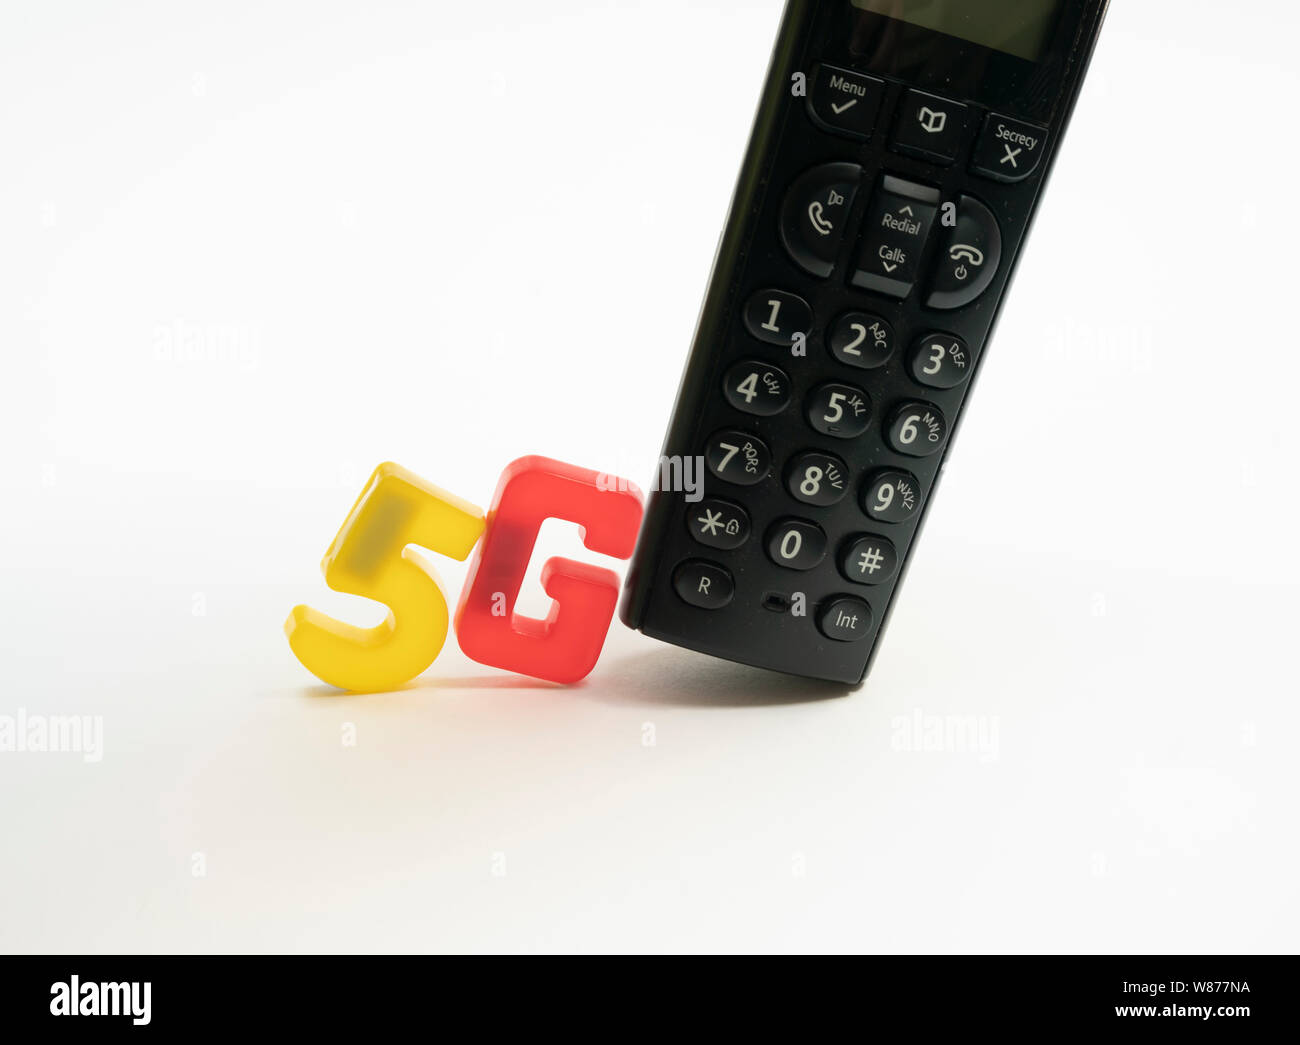 5G telecommunications text letters pushing an old school phone out of the way Stock Photo